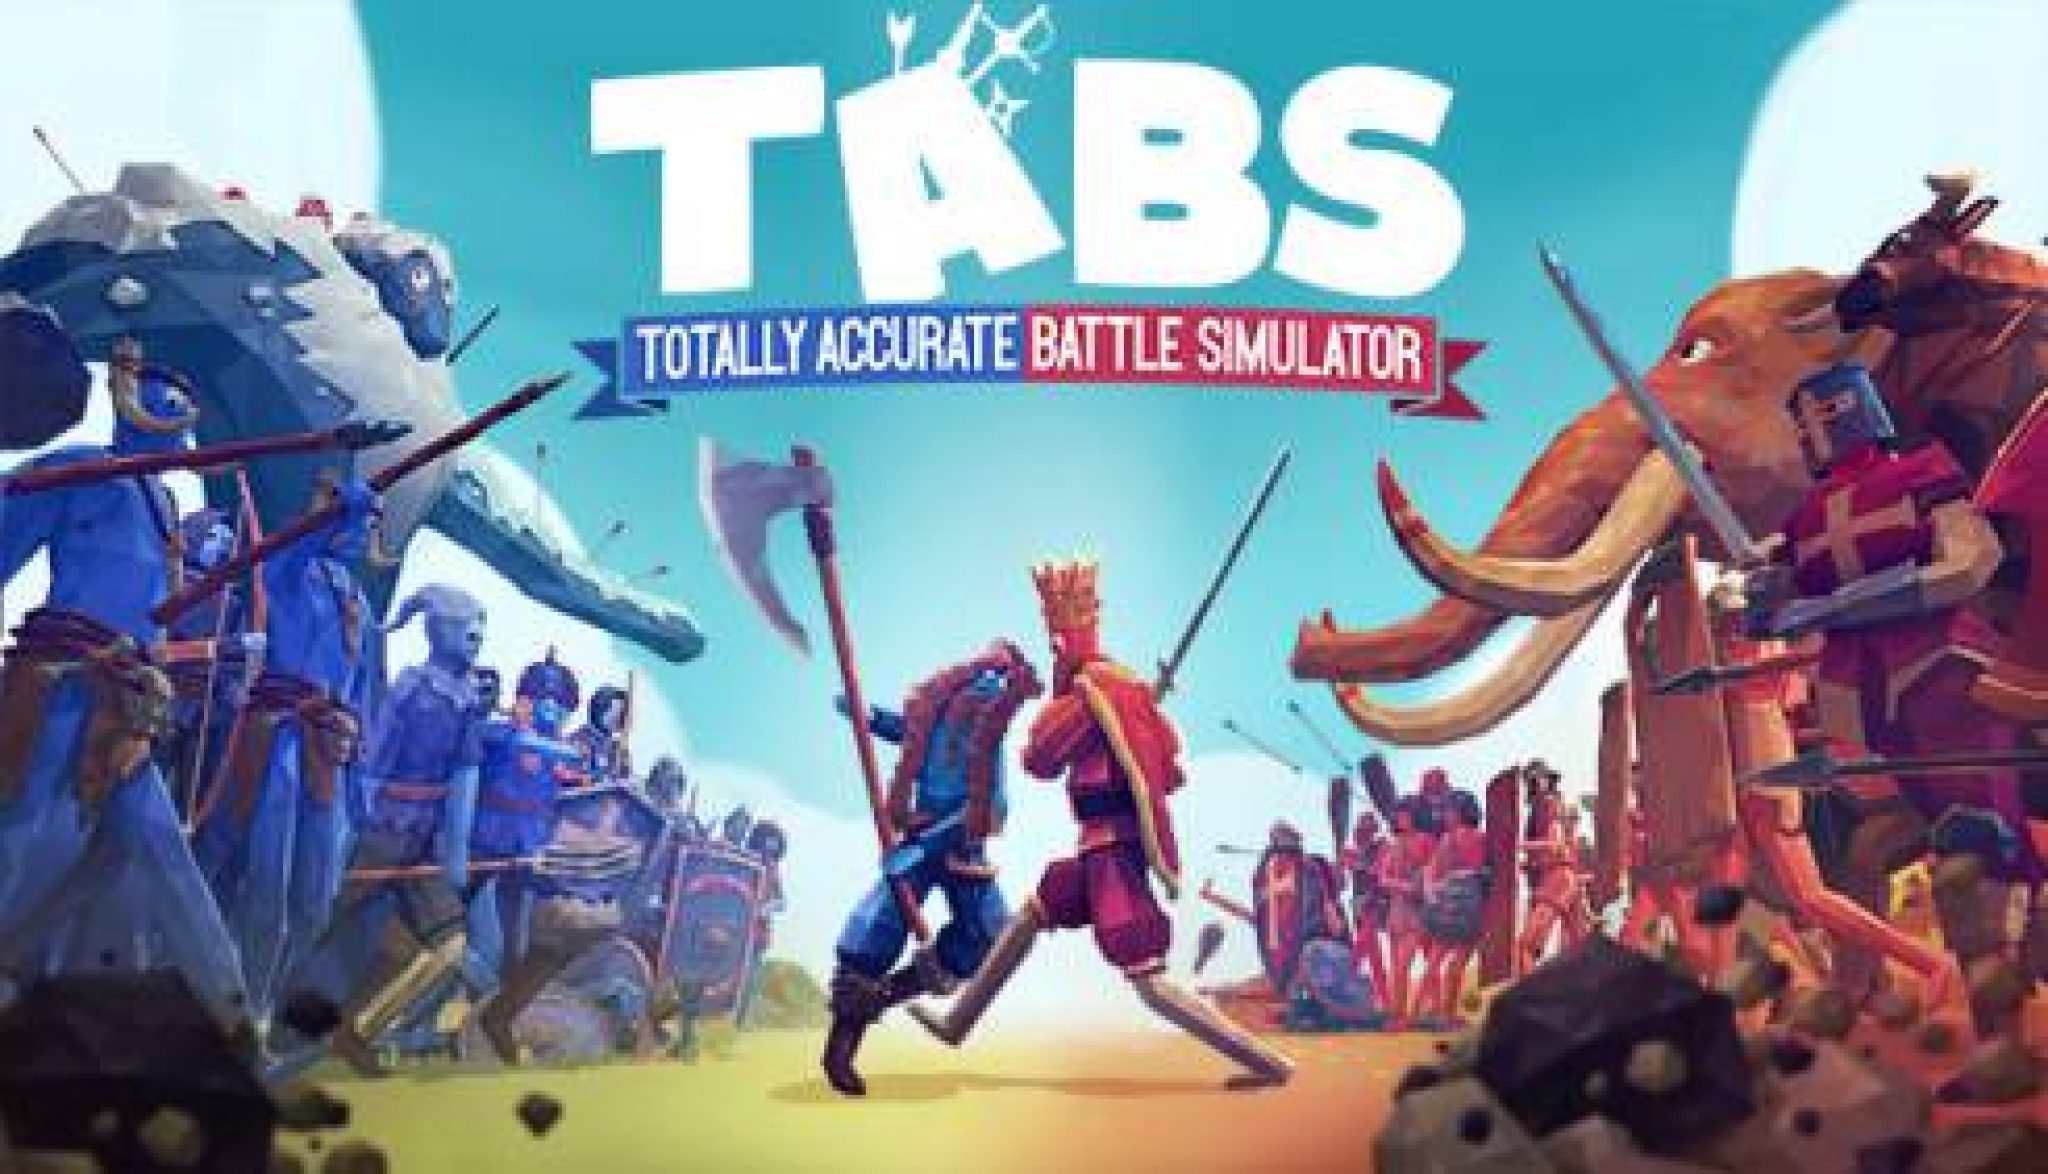 how to open totally accurate battle simulator on pc